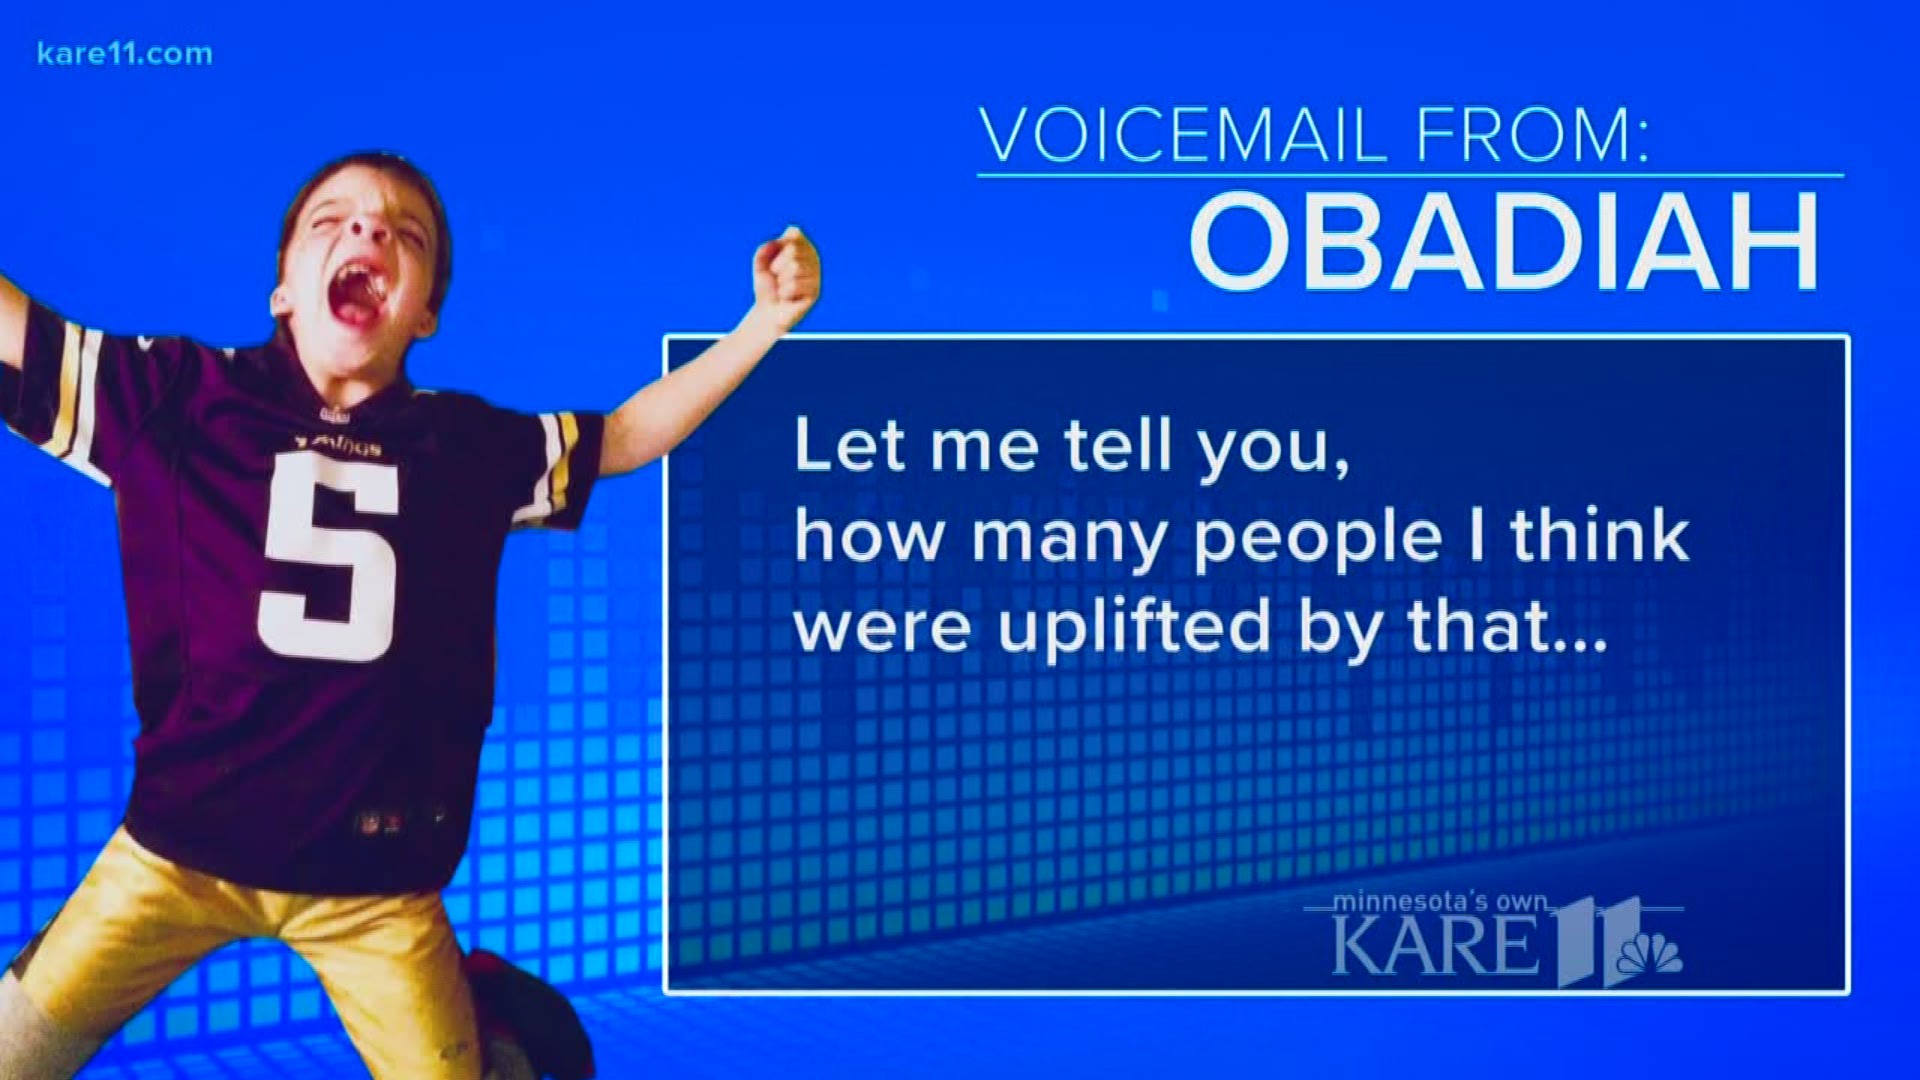 Voicemail from Obadiah